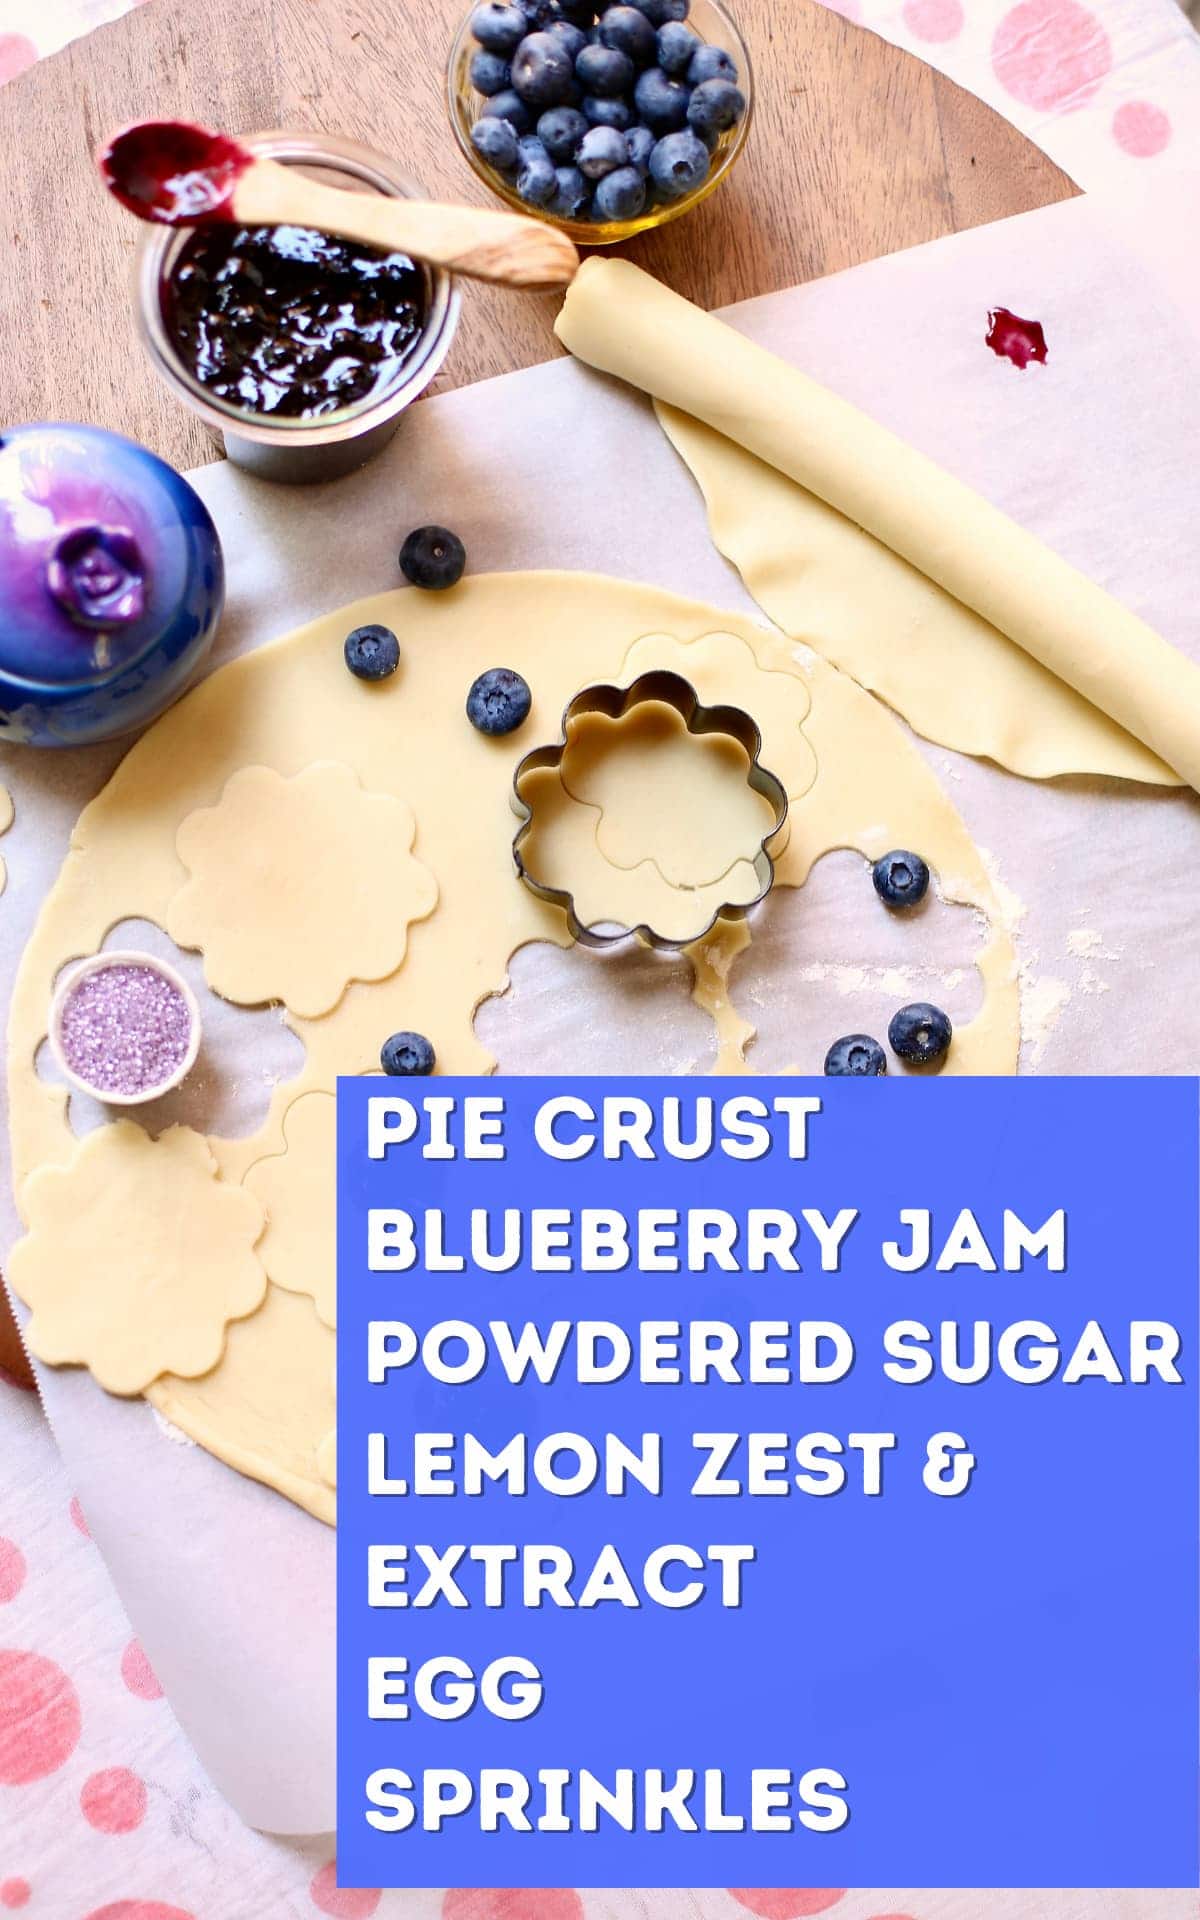 a photo of ingredients, pie crust, jam etc, and a text overlay saying the names of those ingredients.